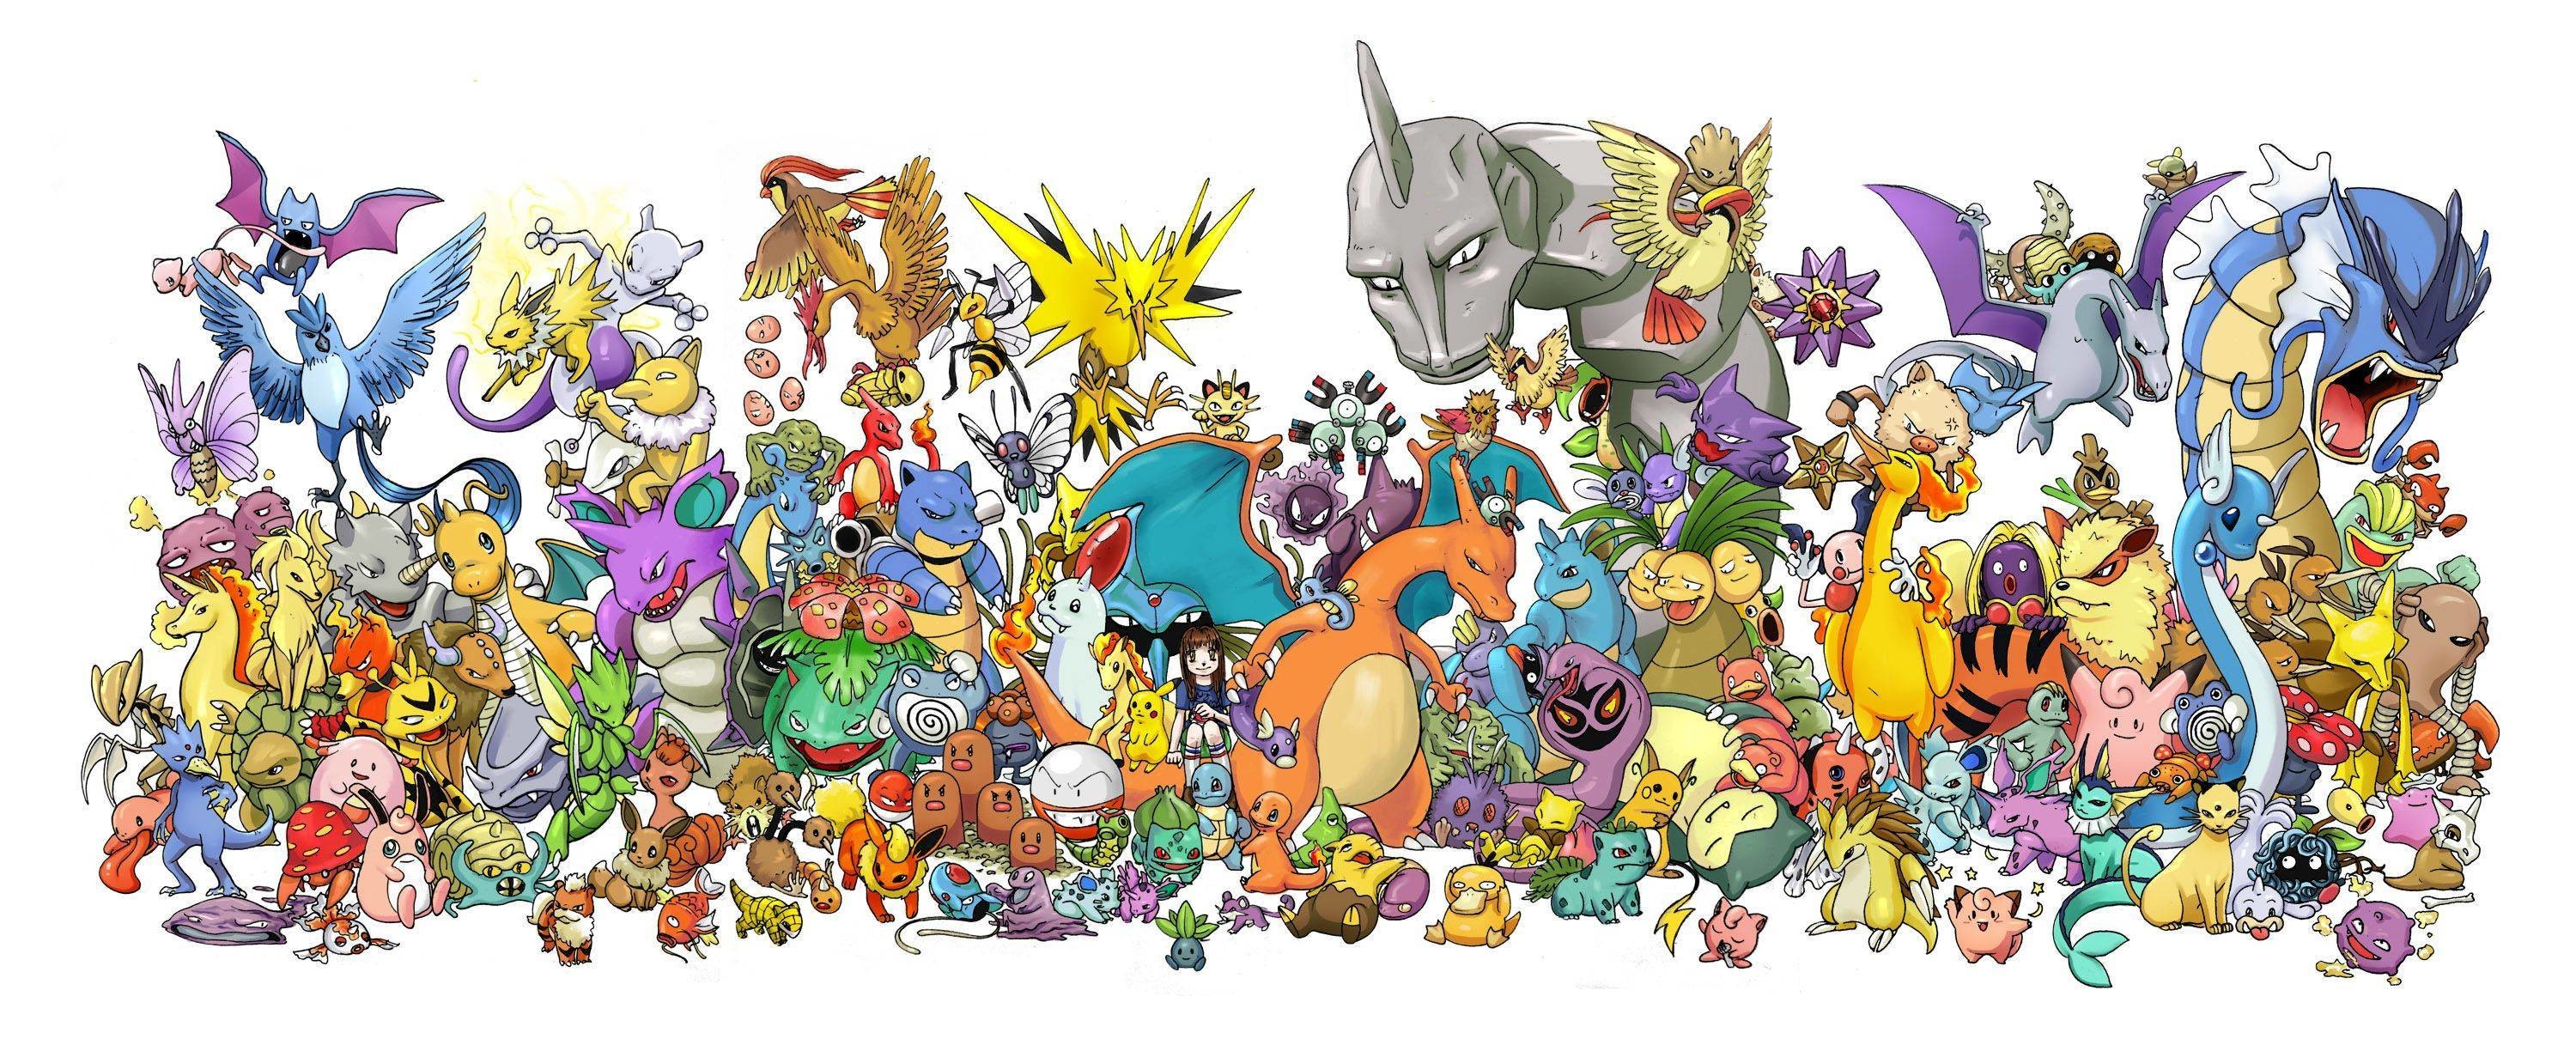 850+ Pokémon HD Wallpapers and Backgrounds